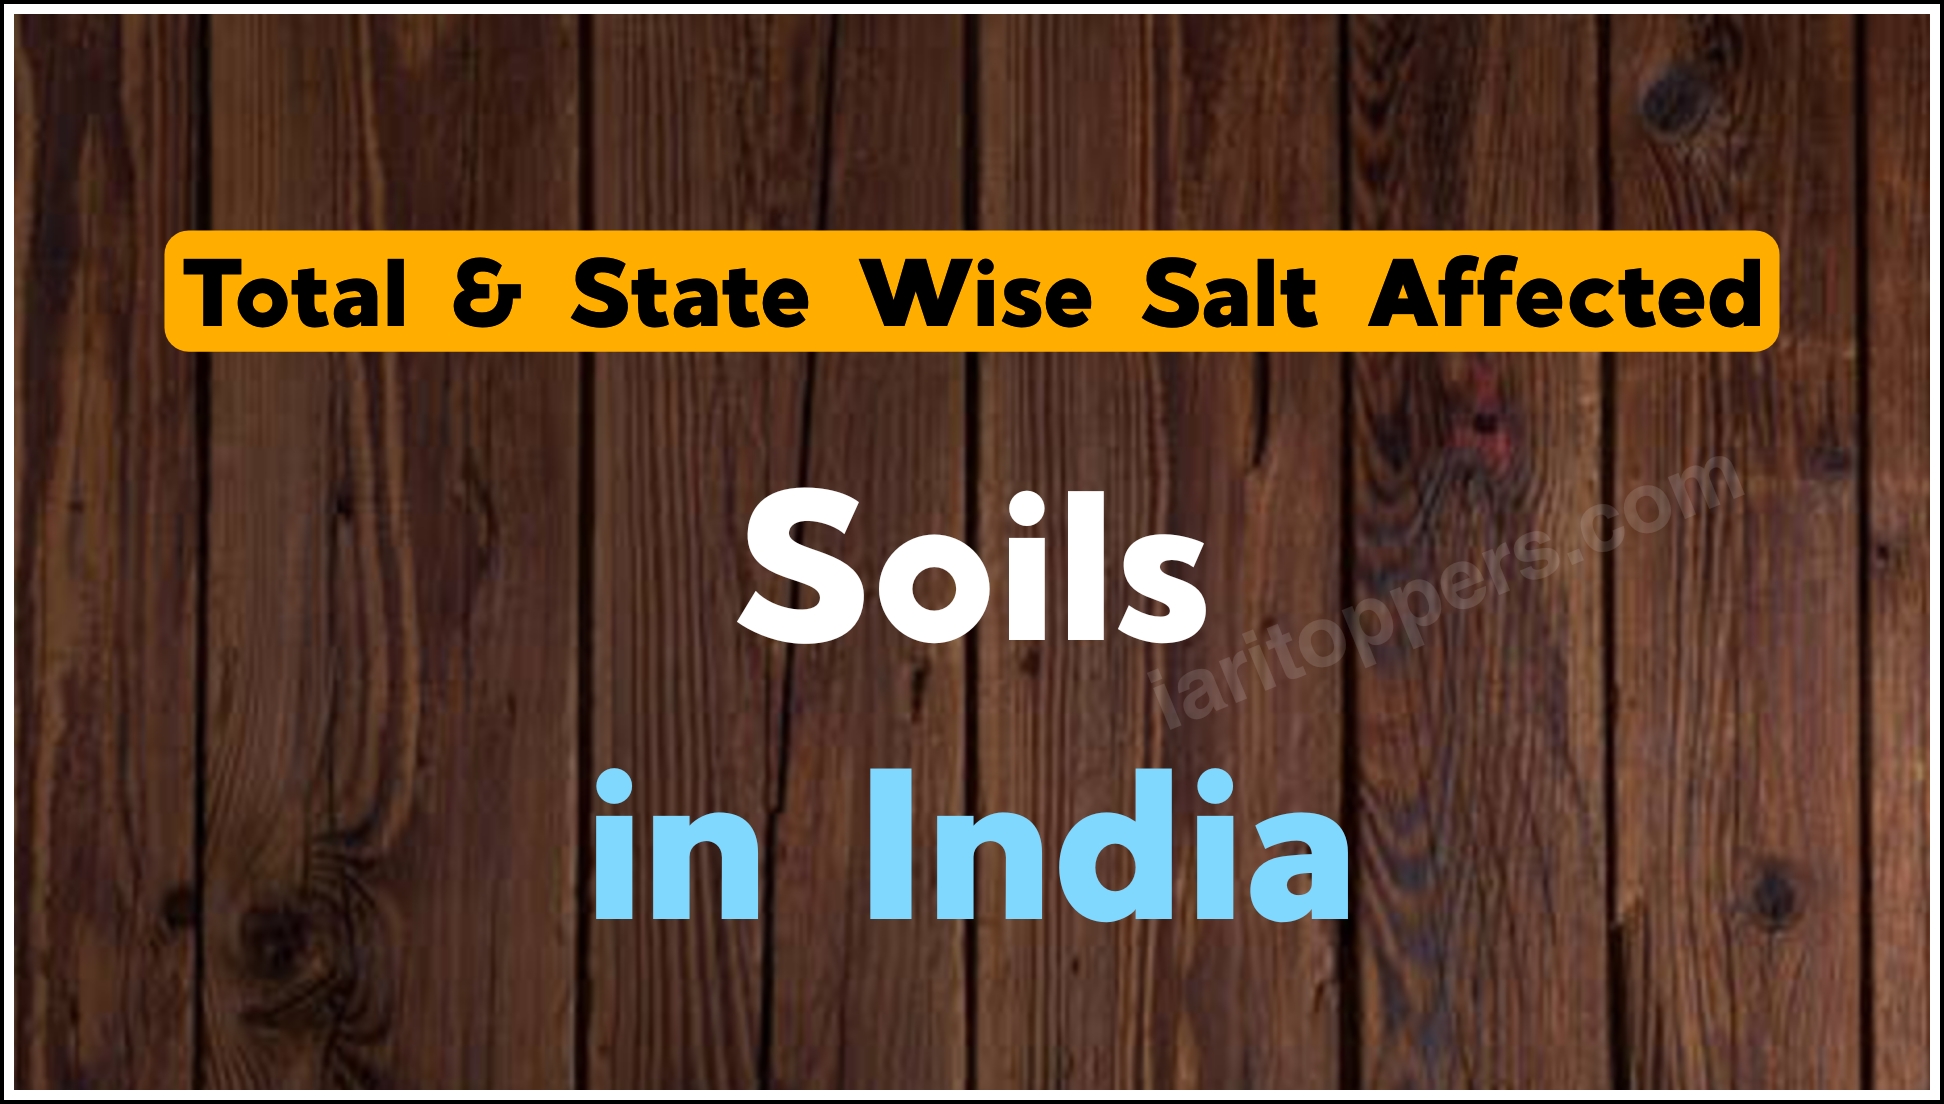 Total and state wise salt affected soils in india